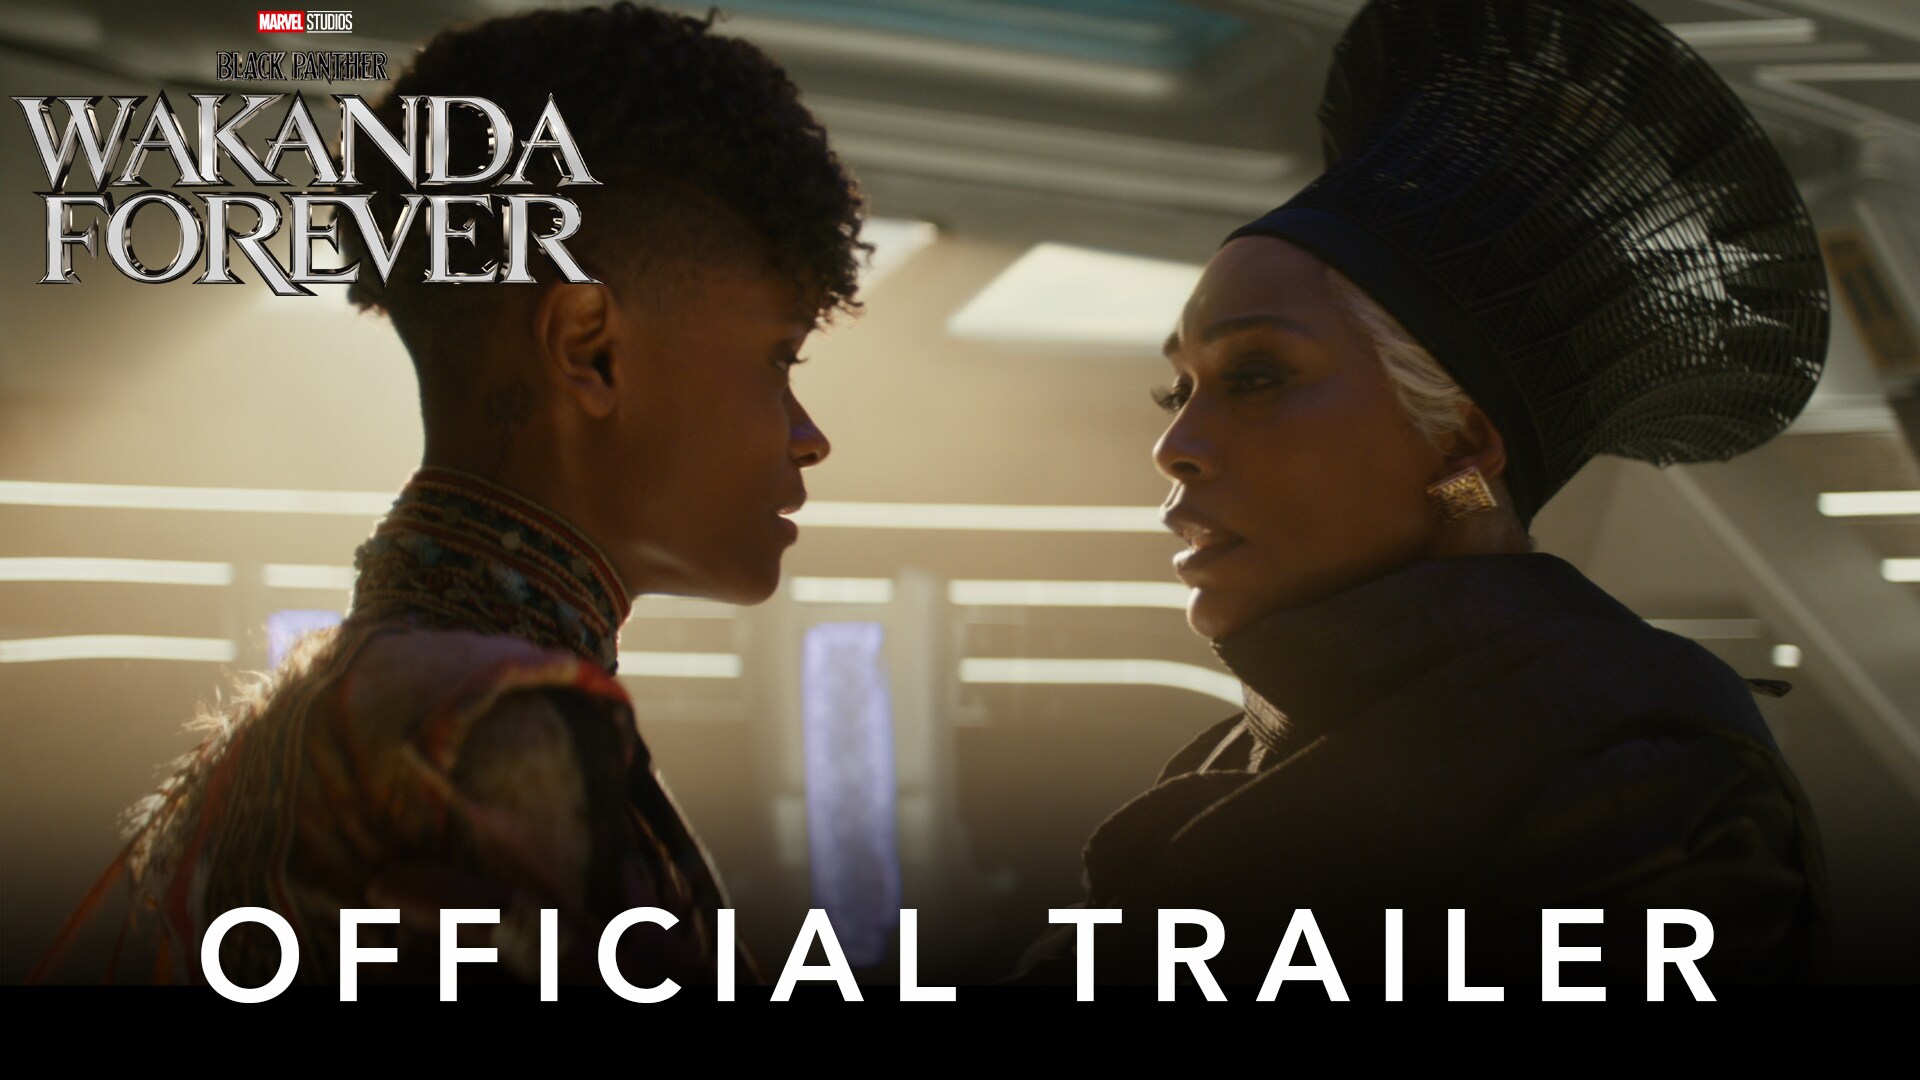 The queen of Wakanda sits in her throne with two guards next to her, looking towards someone out of camera. A bright clear sky can be seen through the clean windows in the background. 'Marvel Studios’ Black Panther: Wakanda Forever' title is in the top left hand corner, 'Official Teaser' text is in the foreground.